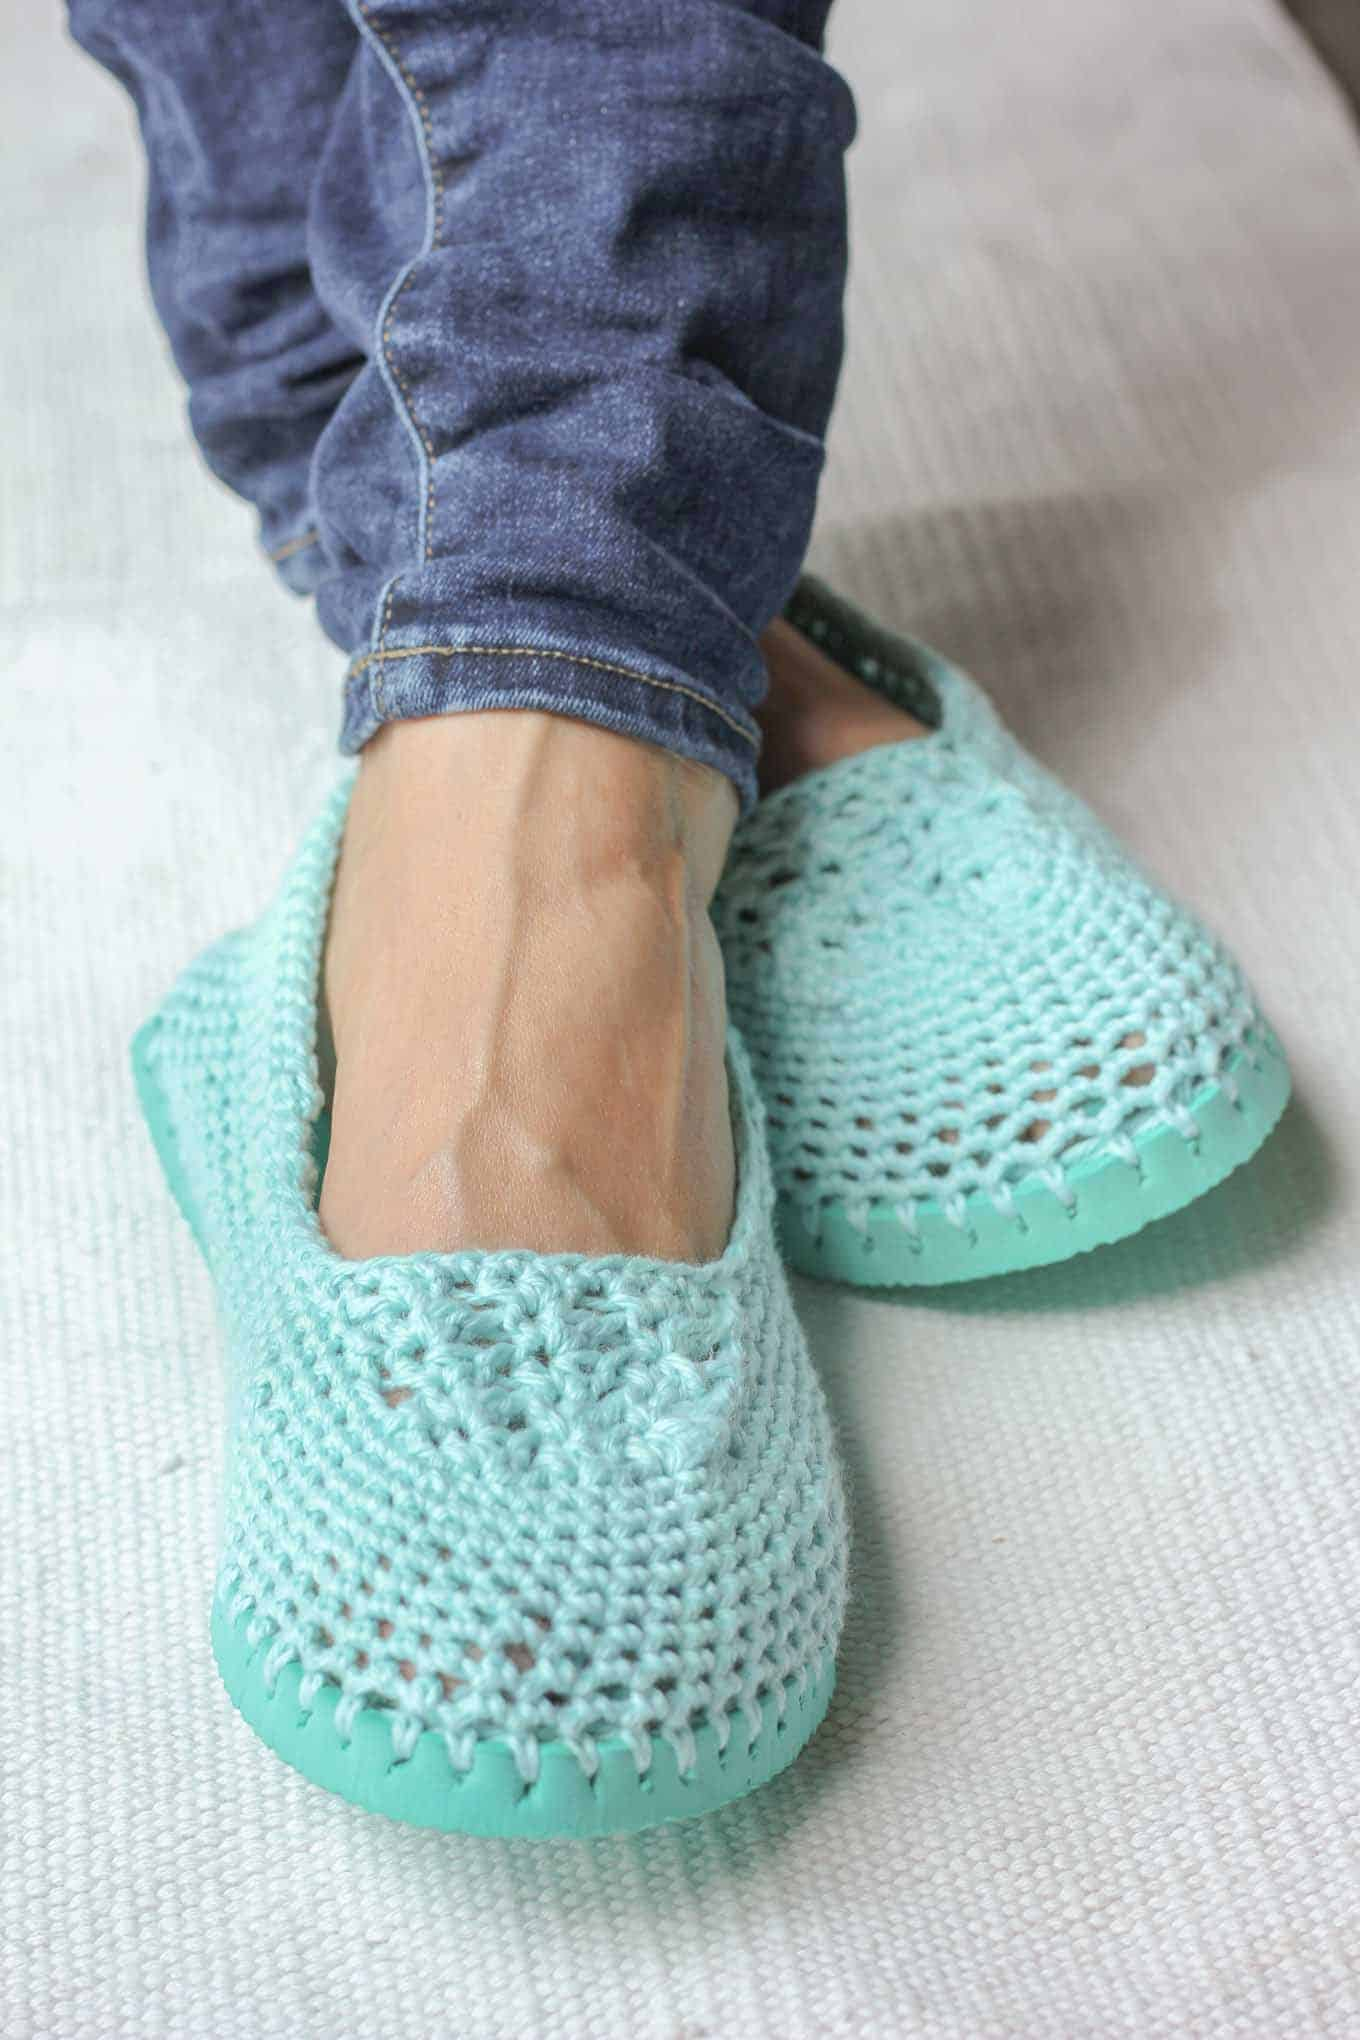 Crochet Slipper Boots Free Pattern 20 Free Crochet Slipper Patterns That Are Perfect For Fall Ideal Me